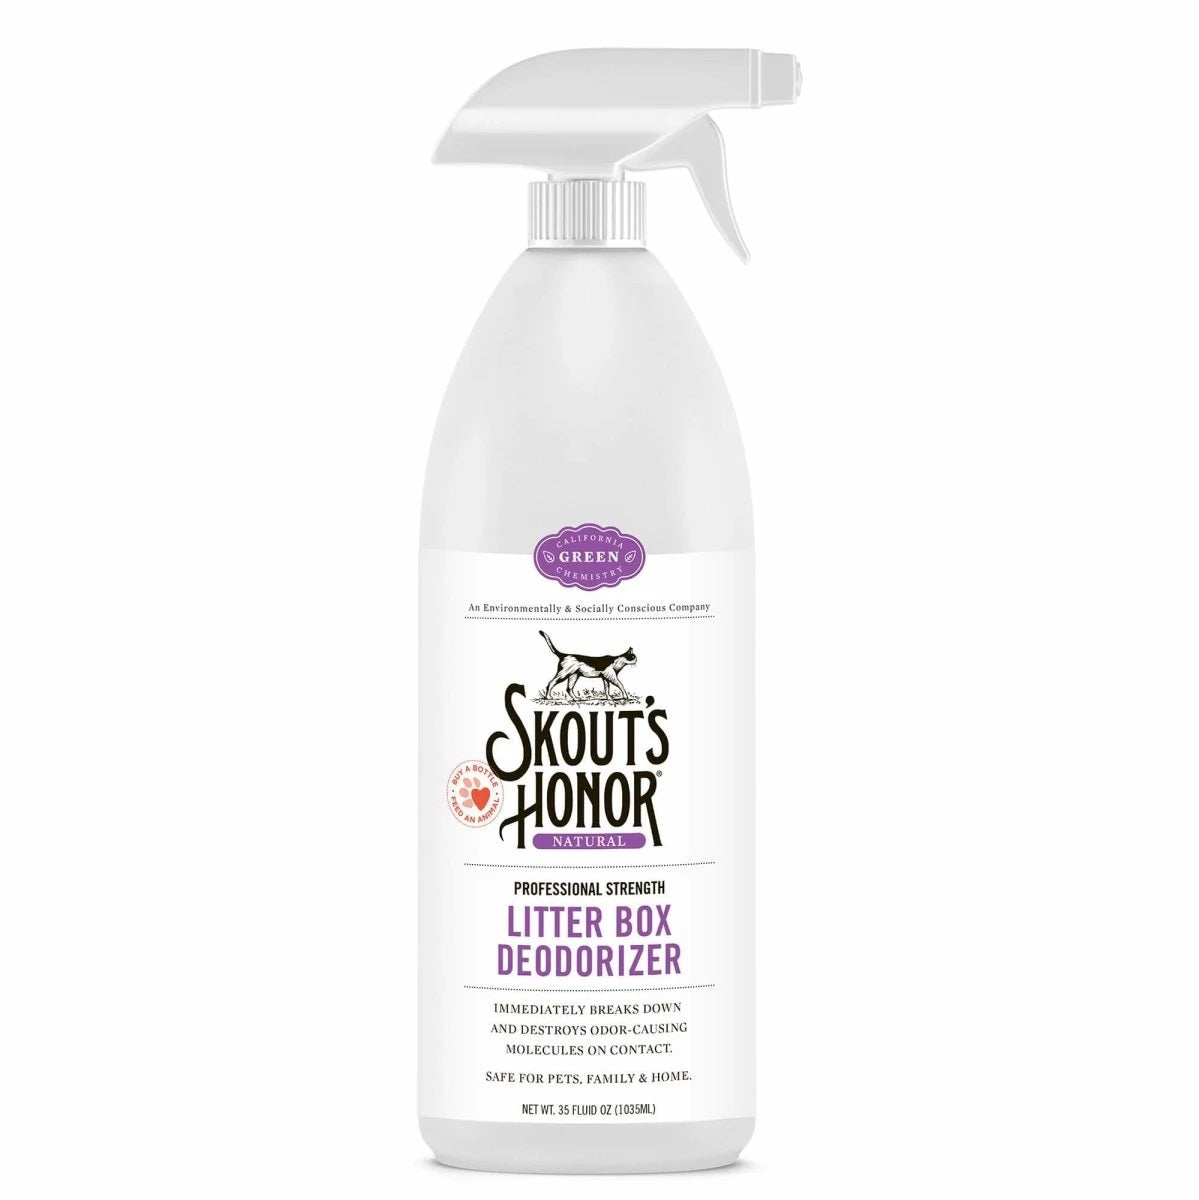 Litter Box Deodorizer by Skout's Honor